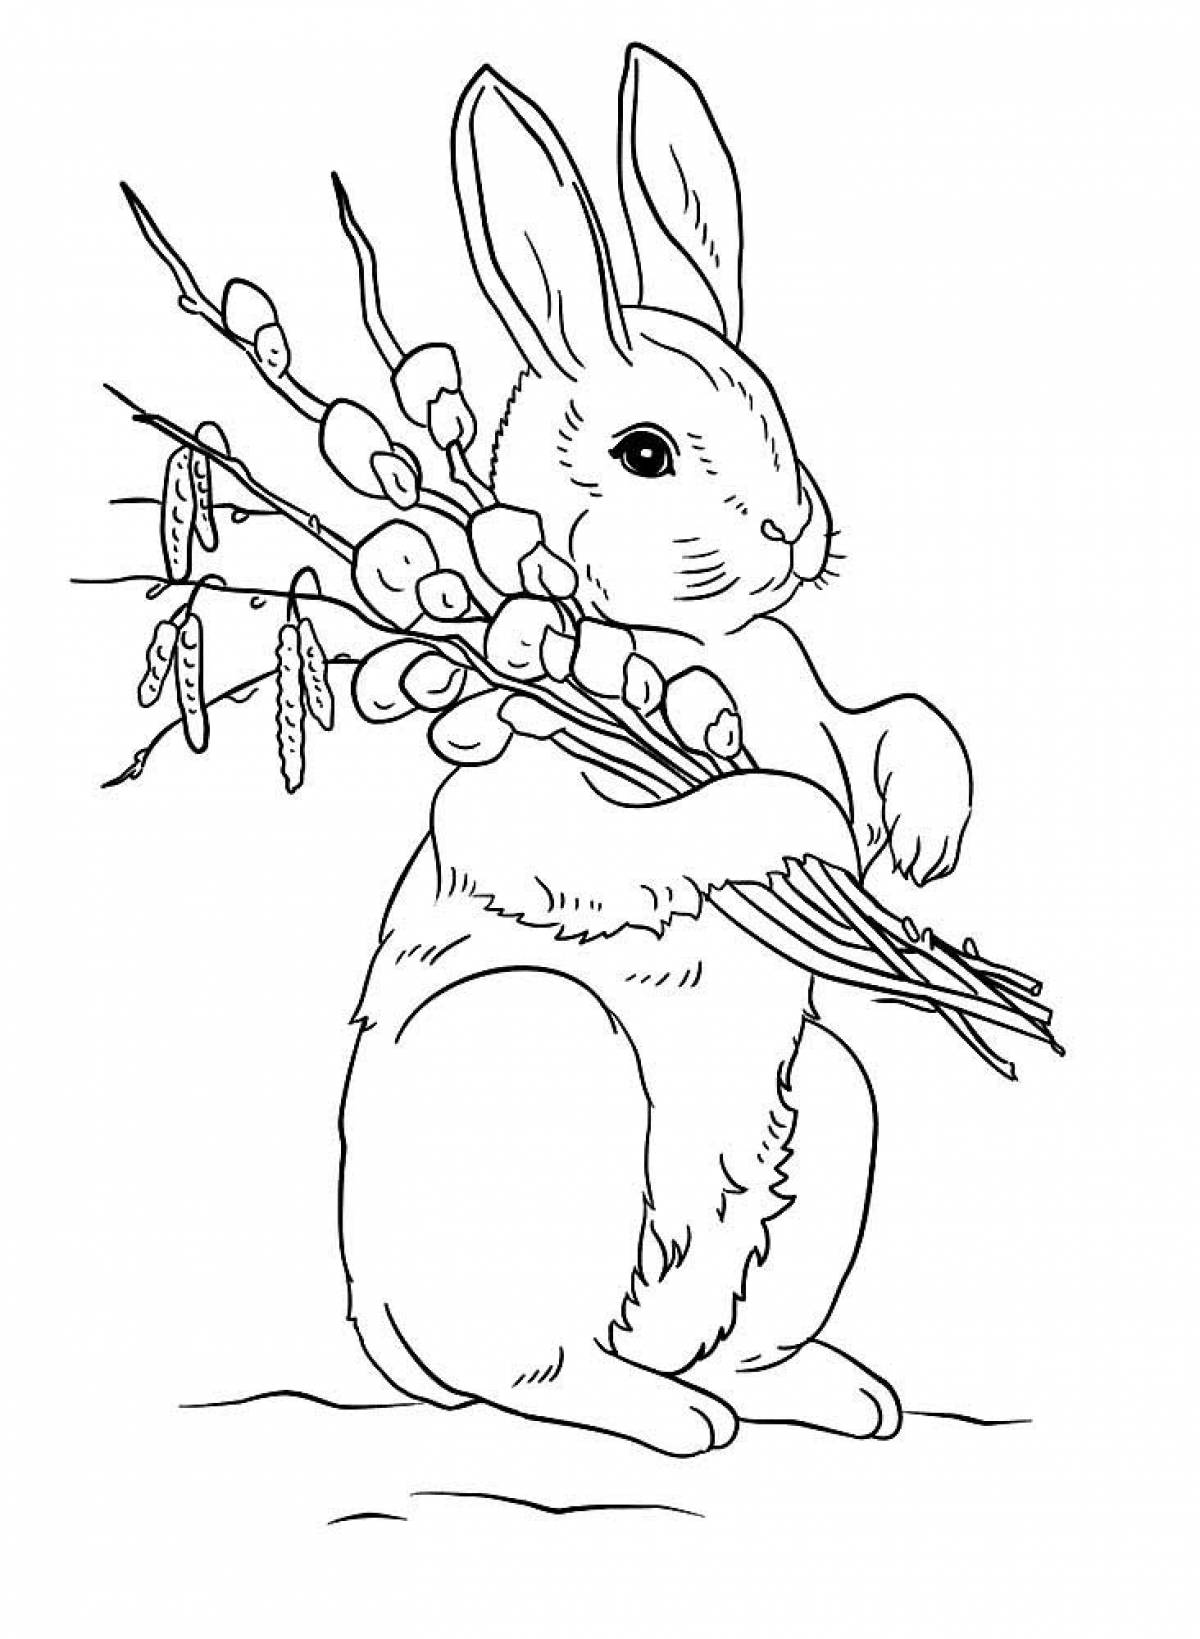 Rabbit and willow